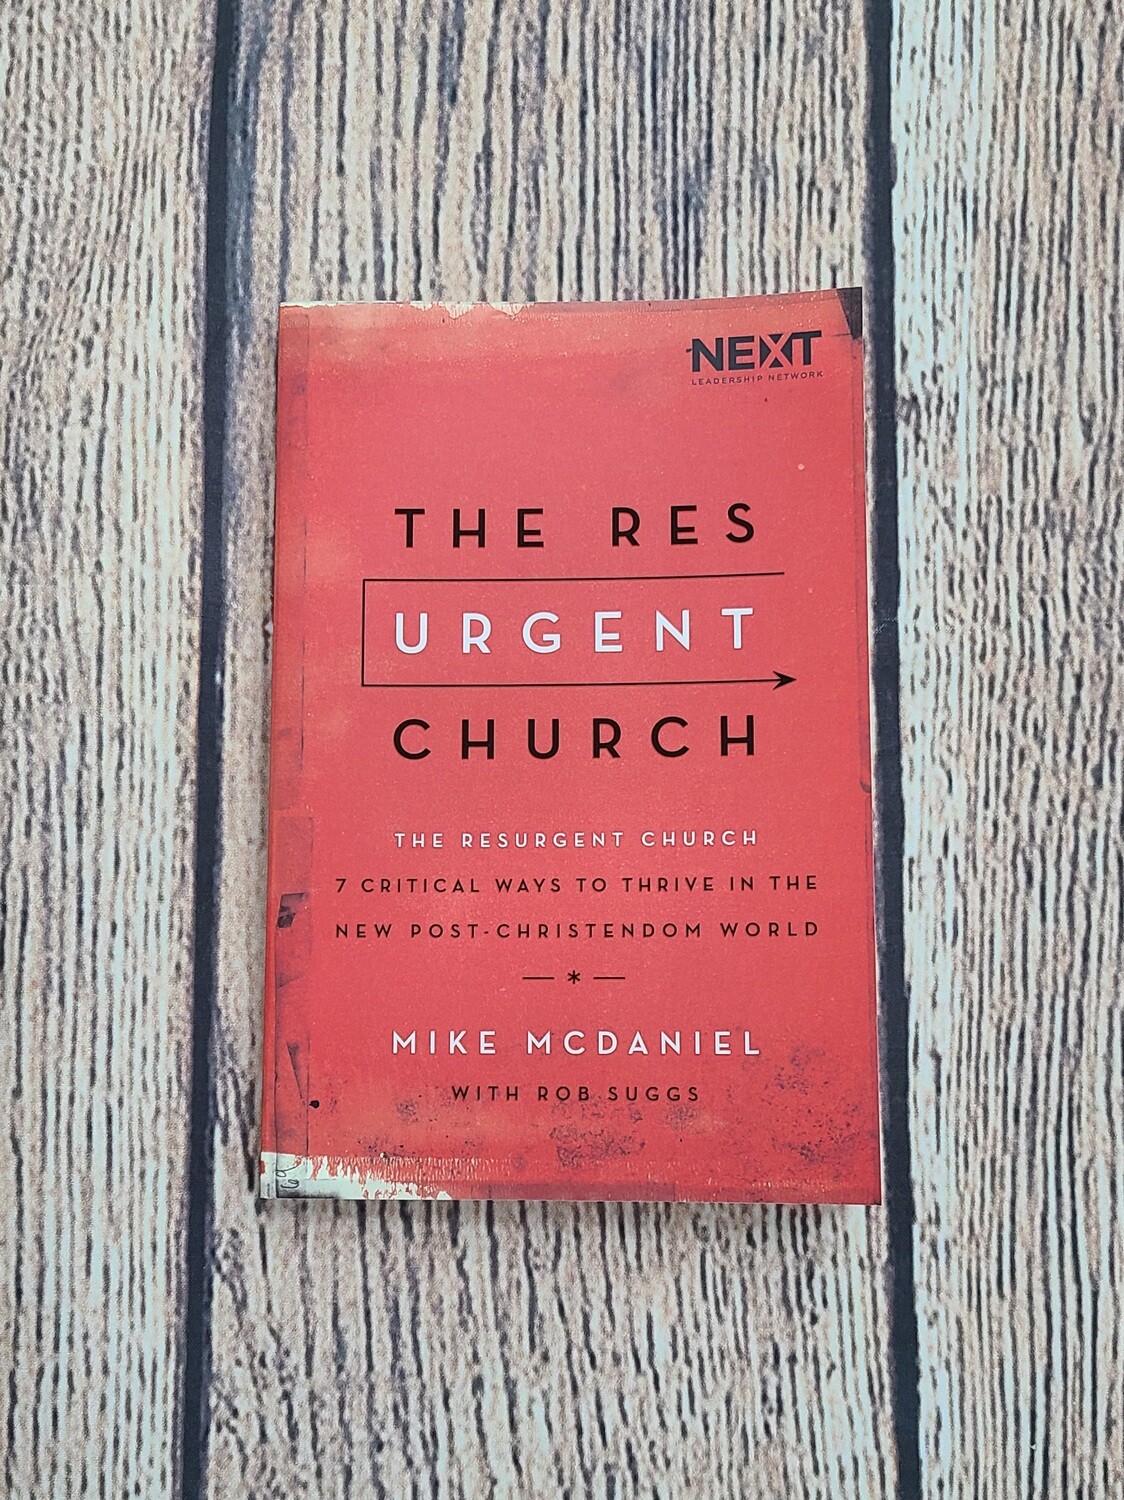 The Resurgent Church: 7 Critical Ways to Thrive in the New Post-Christiendom World by Mike McDaniel with Rob Suggs